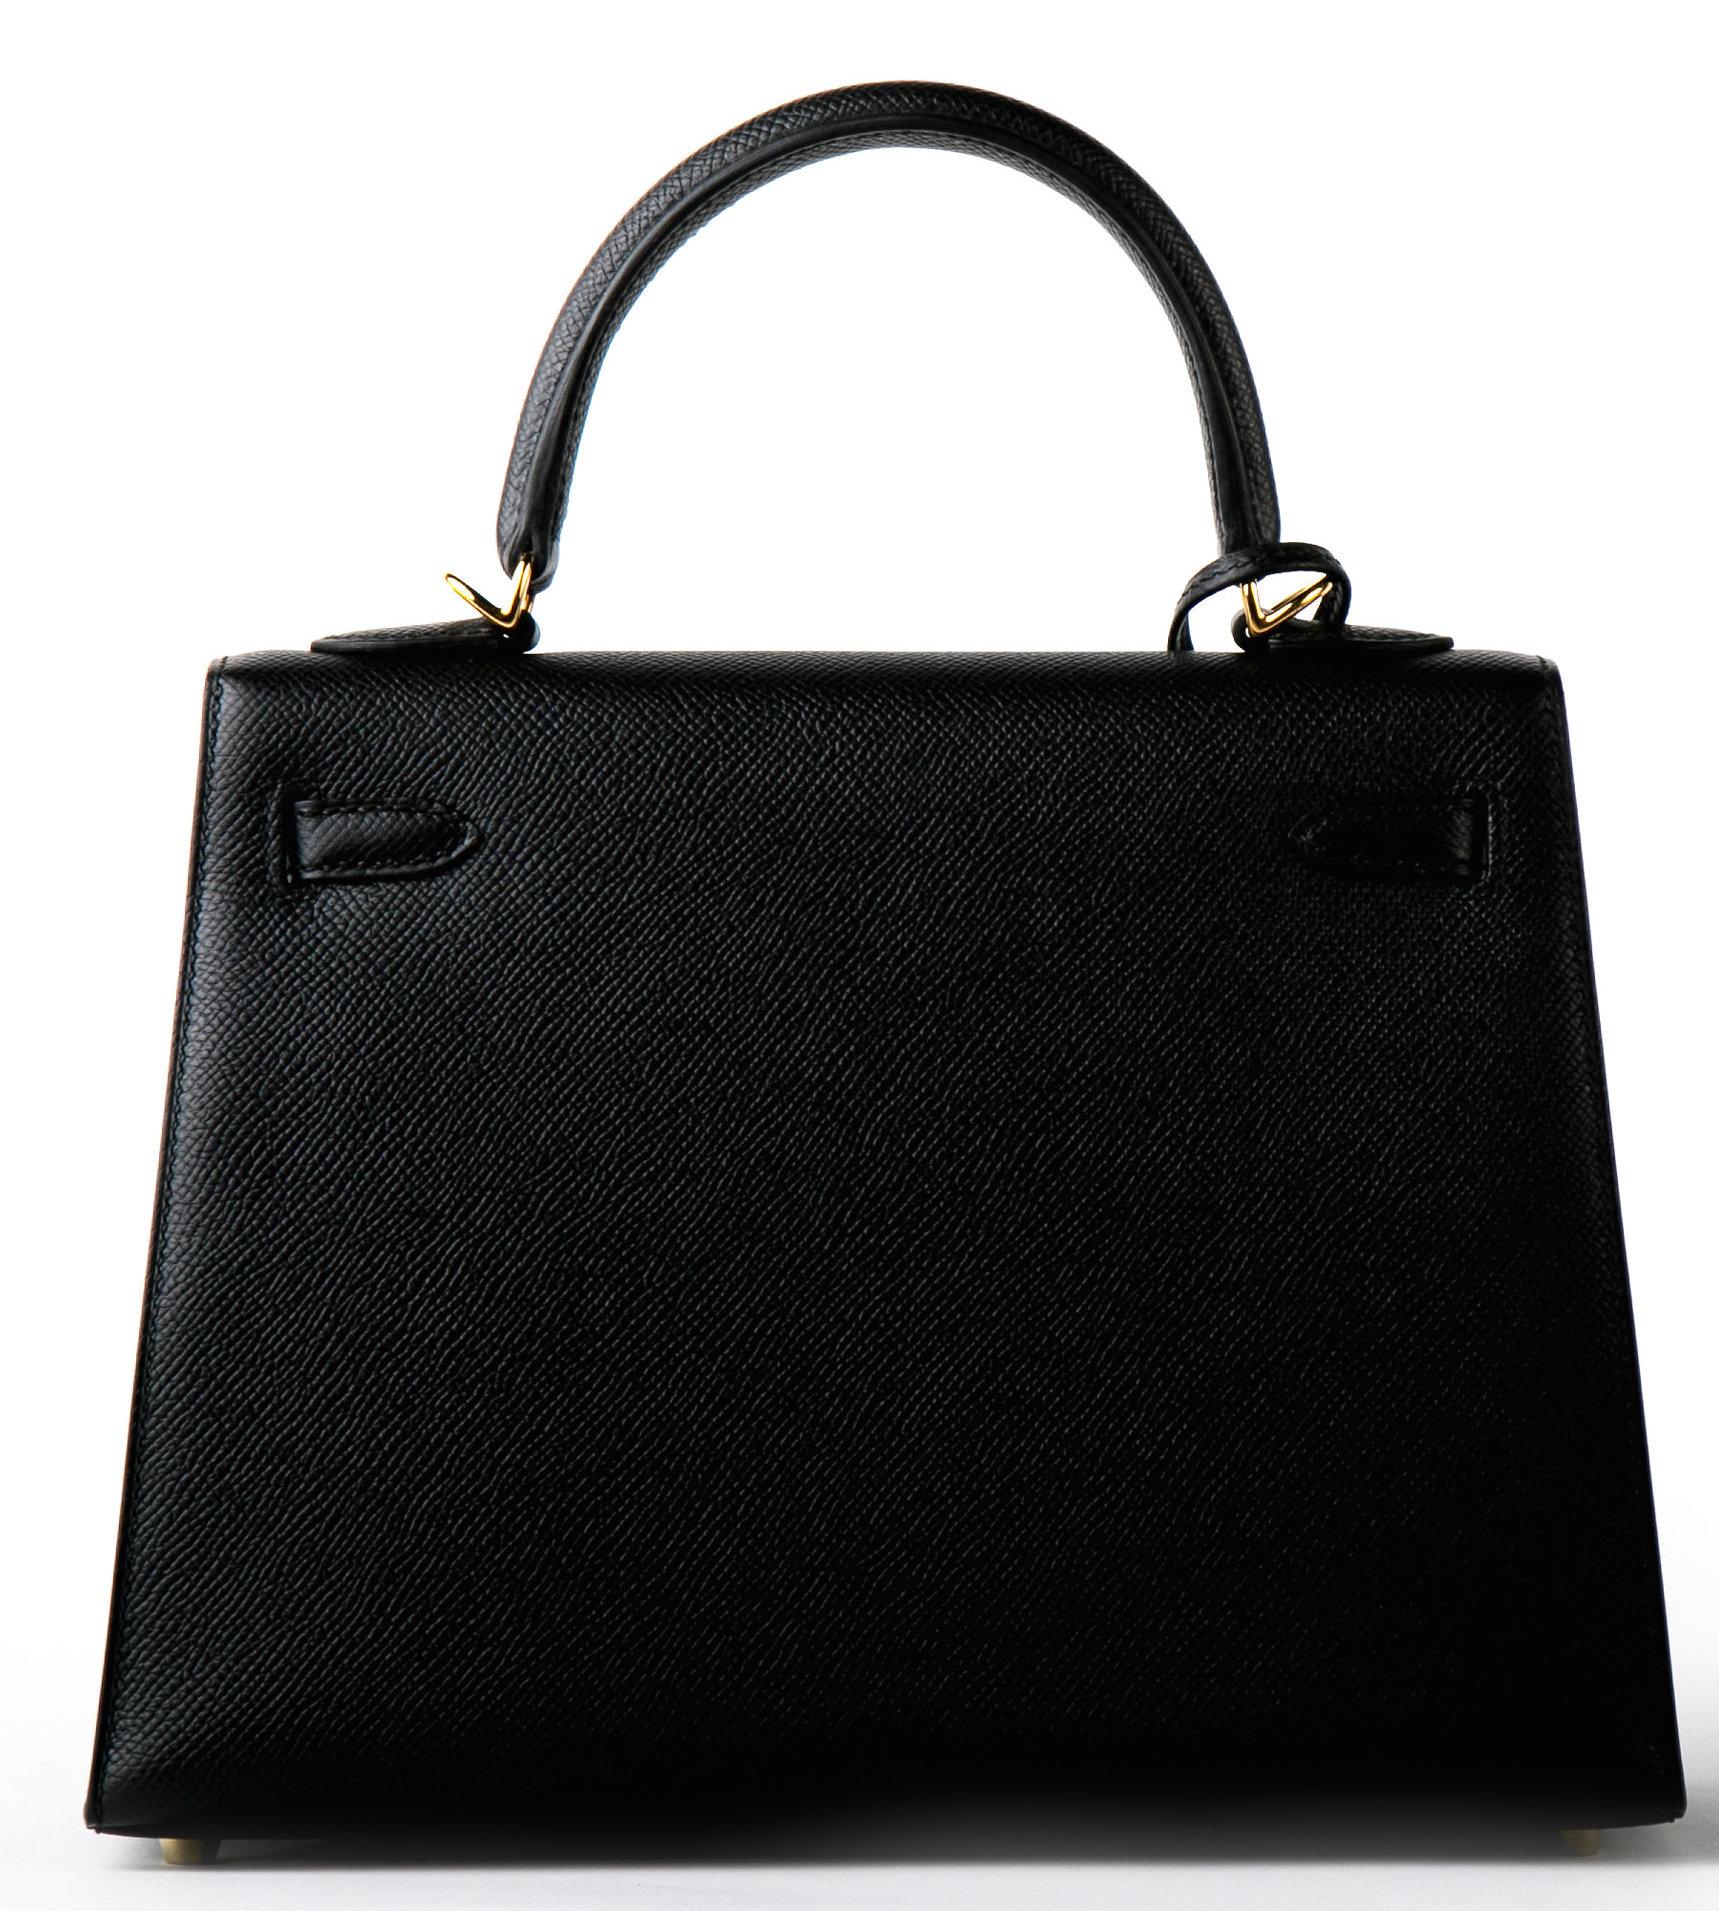 Hermes 25cm Kelly
Hermes Kelly 25cm
Never worn, plastic on the hardware including shoulder strap hardware
One of the hottest bags in the market right now
Epsom in size 25 Sellier, almost impossible to find
We have it!

Black
Gold Hardware
Epsom